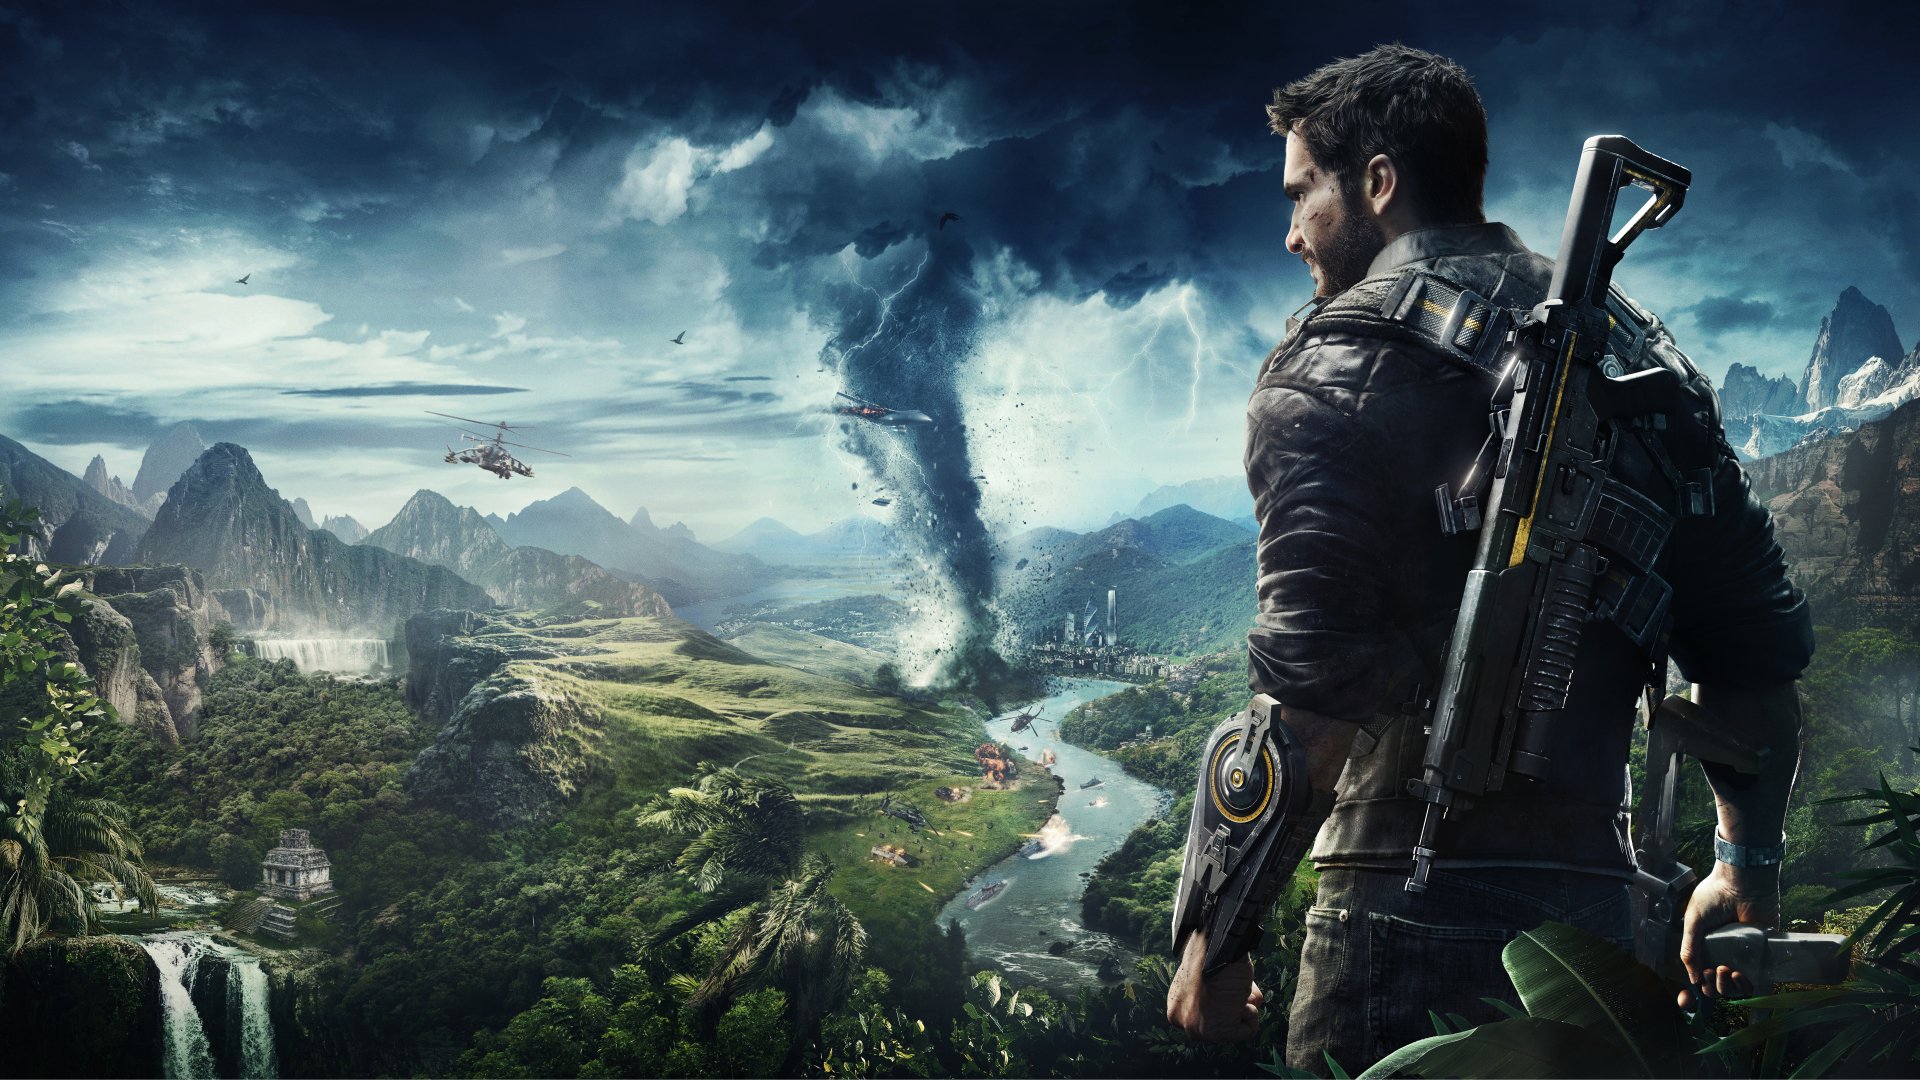 1920x1080 just cause 4 backgrounds